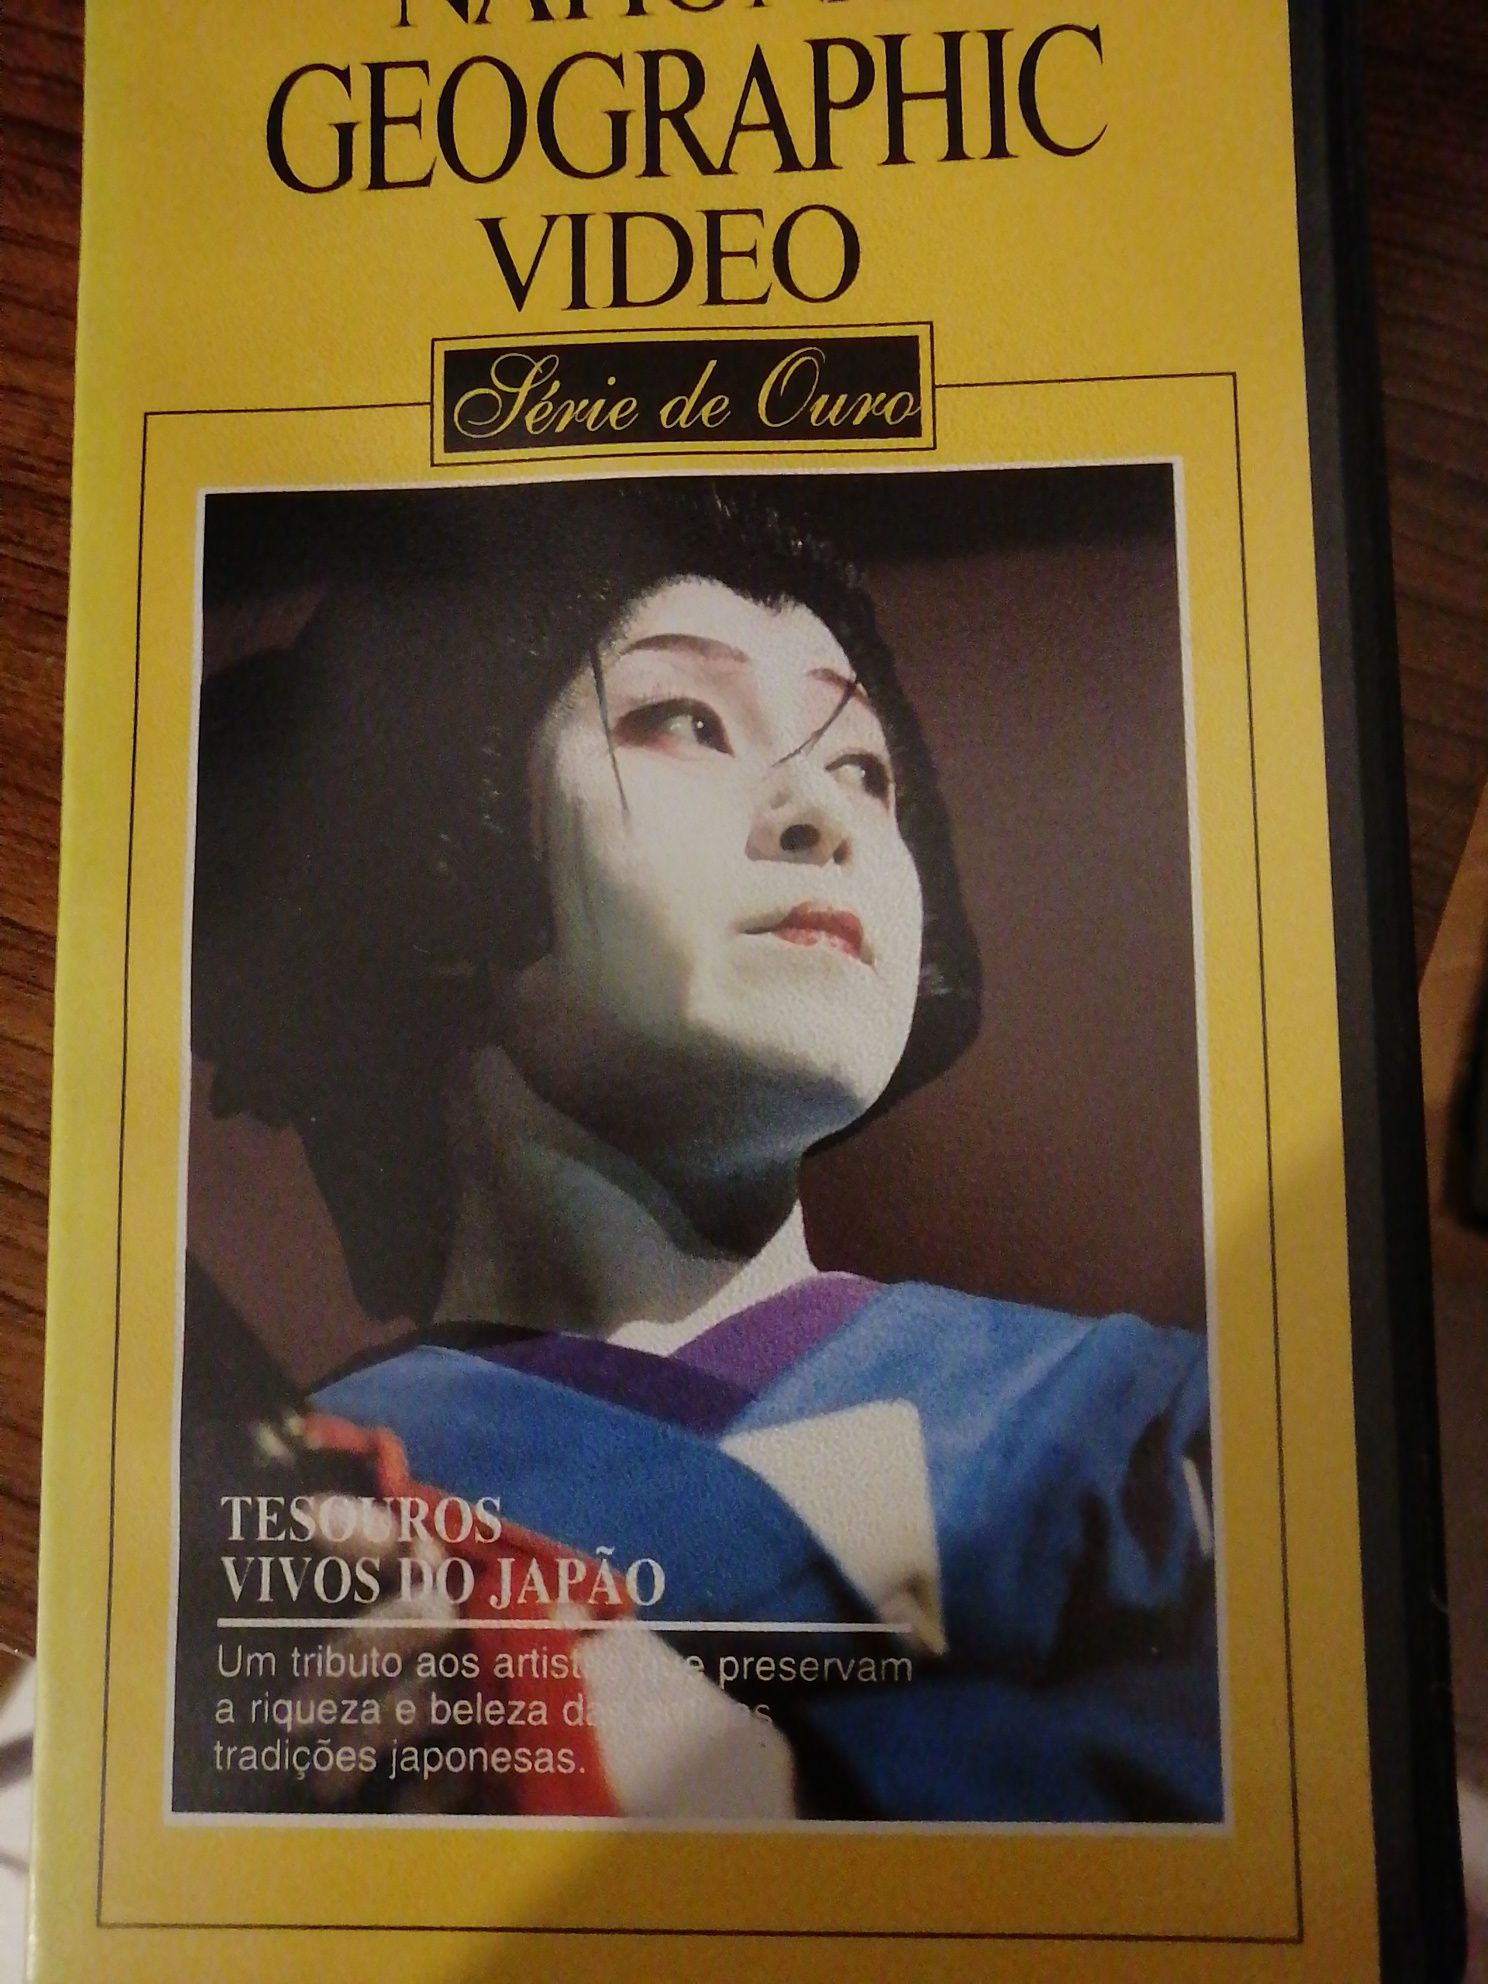 Filmes NATIONAL GEOGRAPHIC, cassete vhs